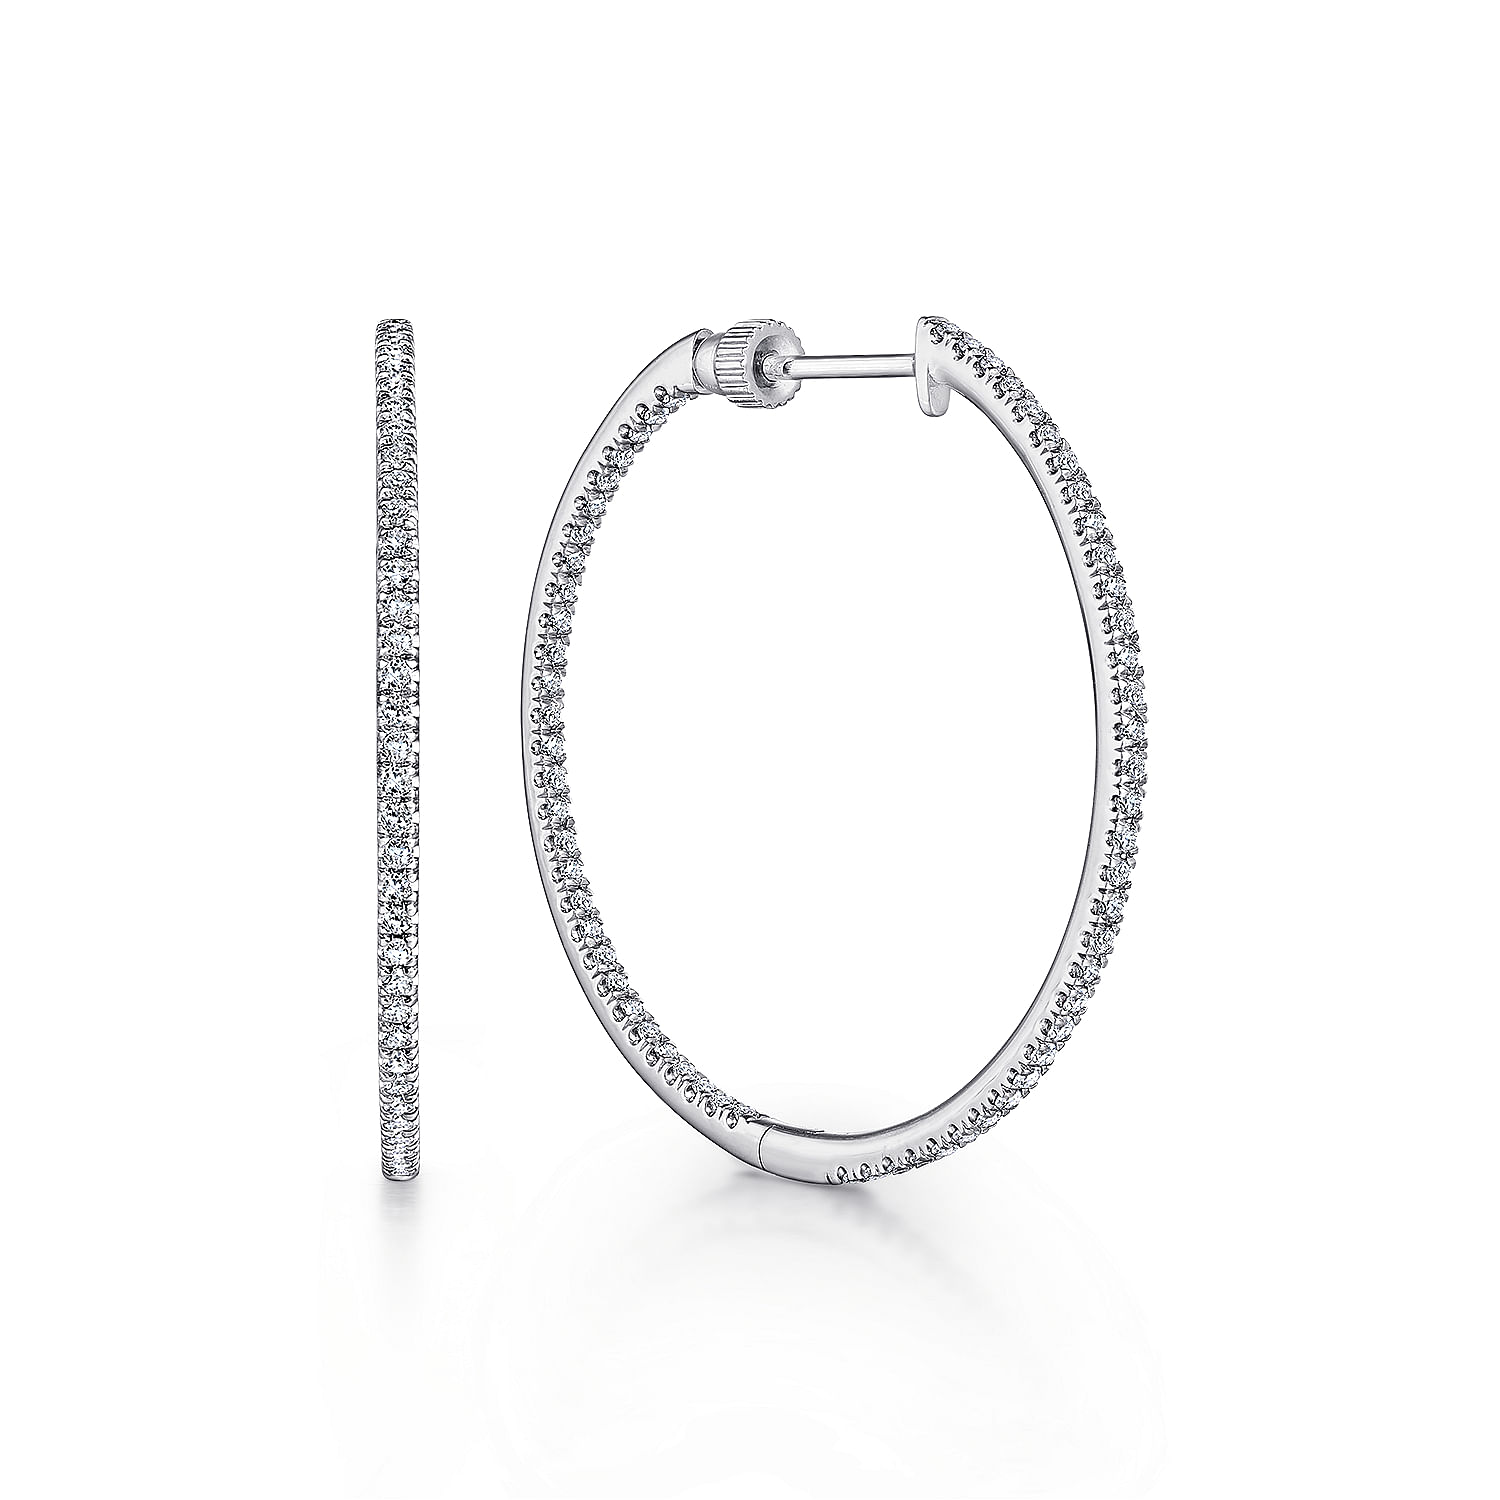 14K White Gold French Pavé 30mm Round Inside Out Diamond Hoop Earrings